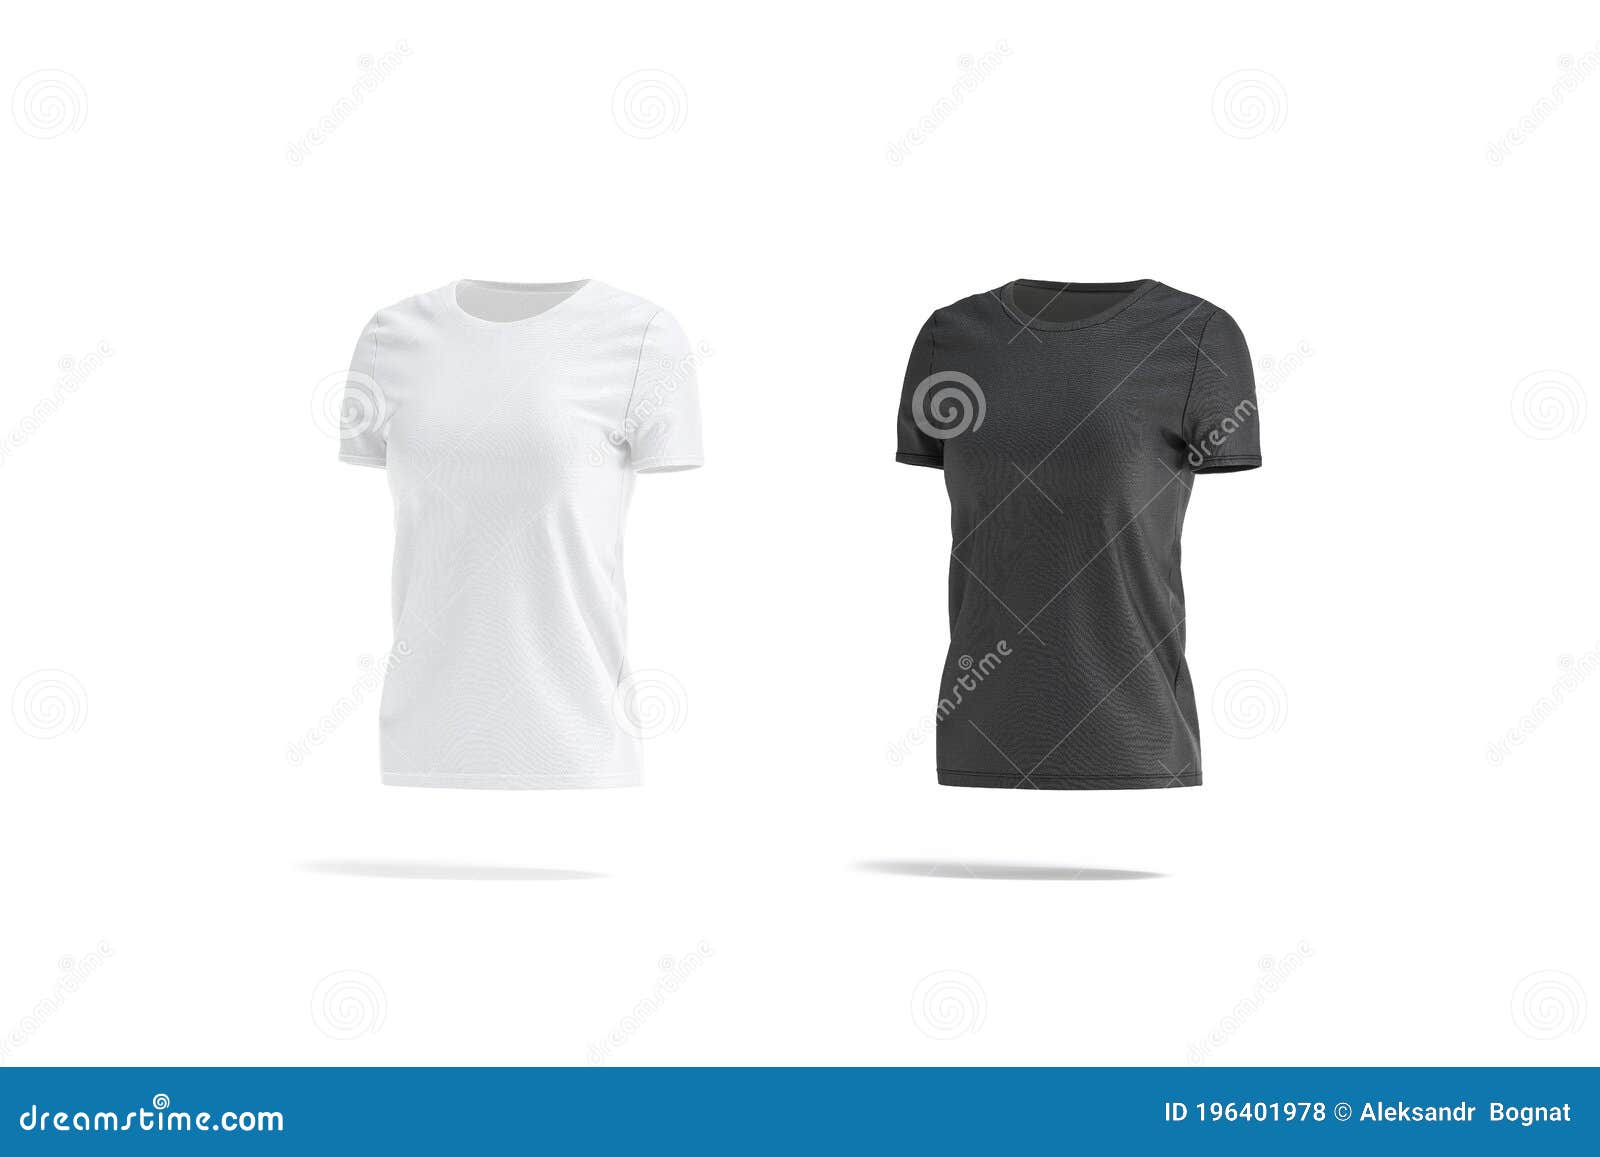 Download Blank Black And White Women T-shirt Mockup Set, Side View ...